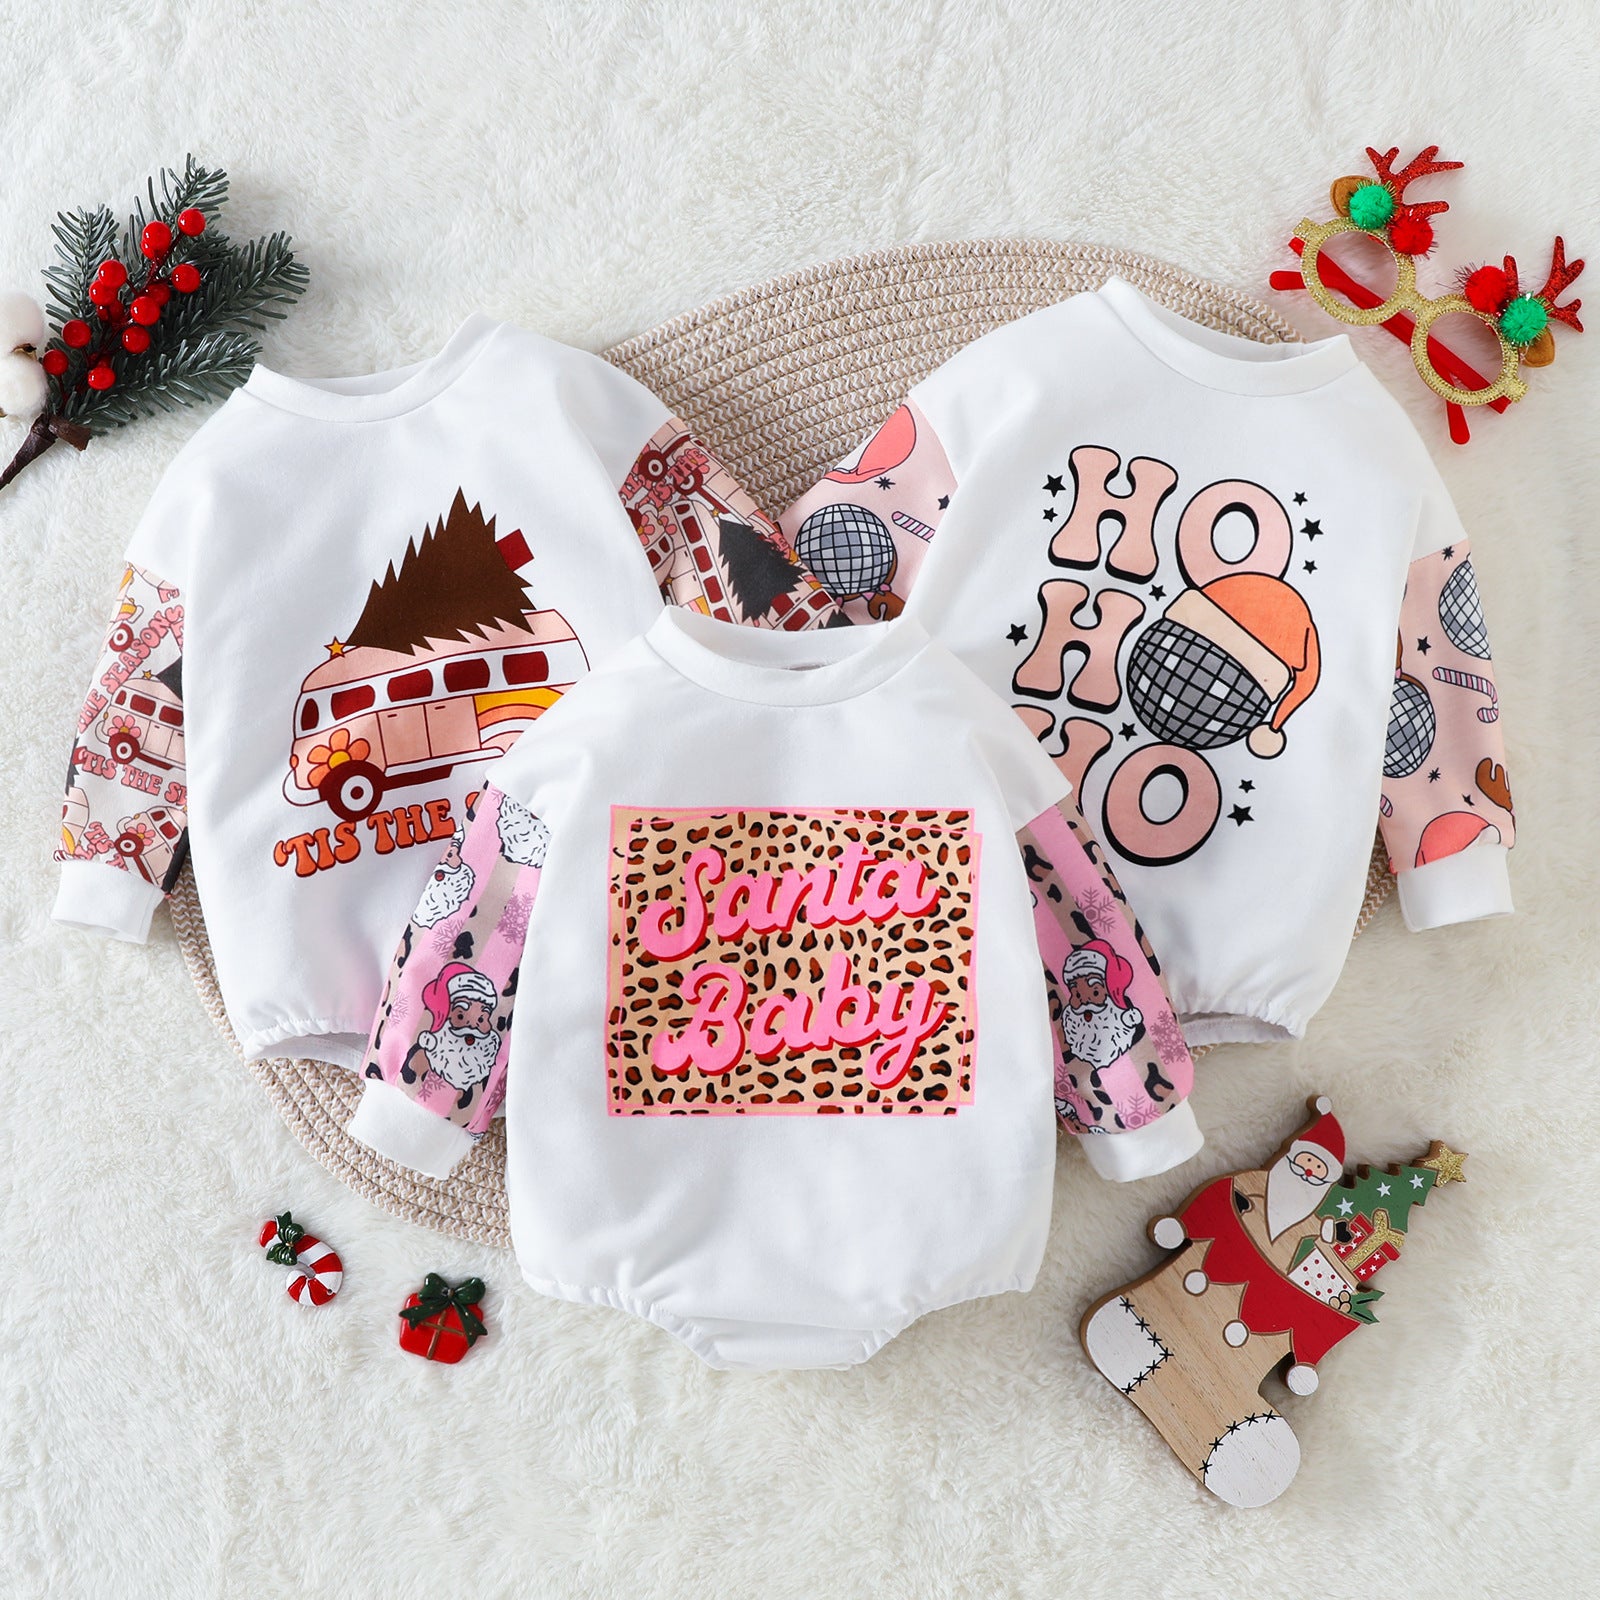 Autumn Kids' Rompers New European And American Infant Toddler Cartoon Printed Christmas Romper